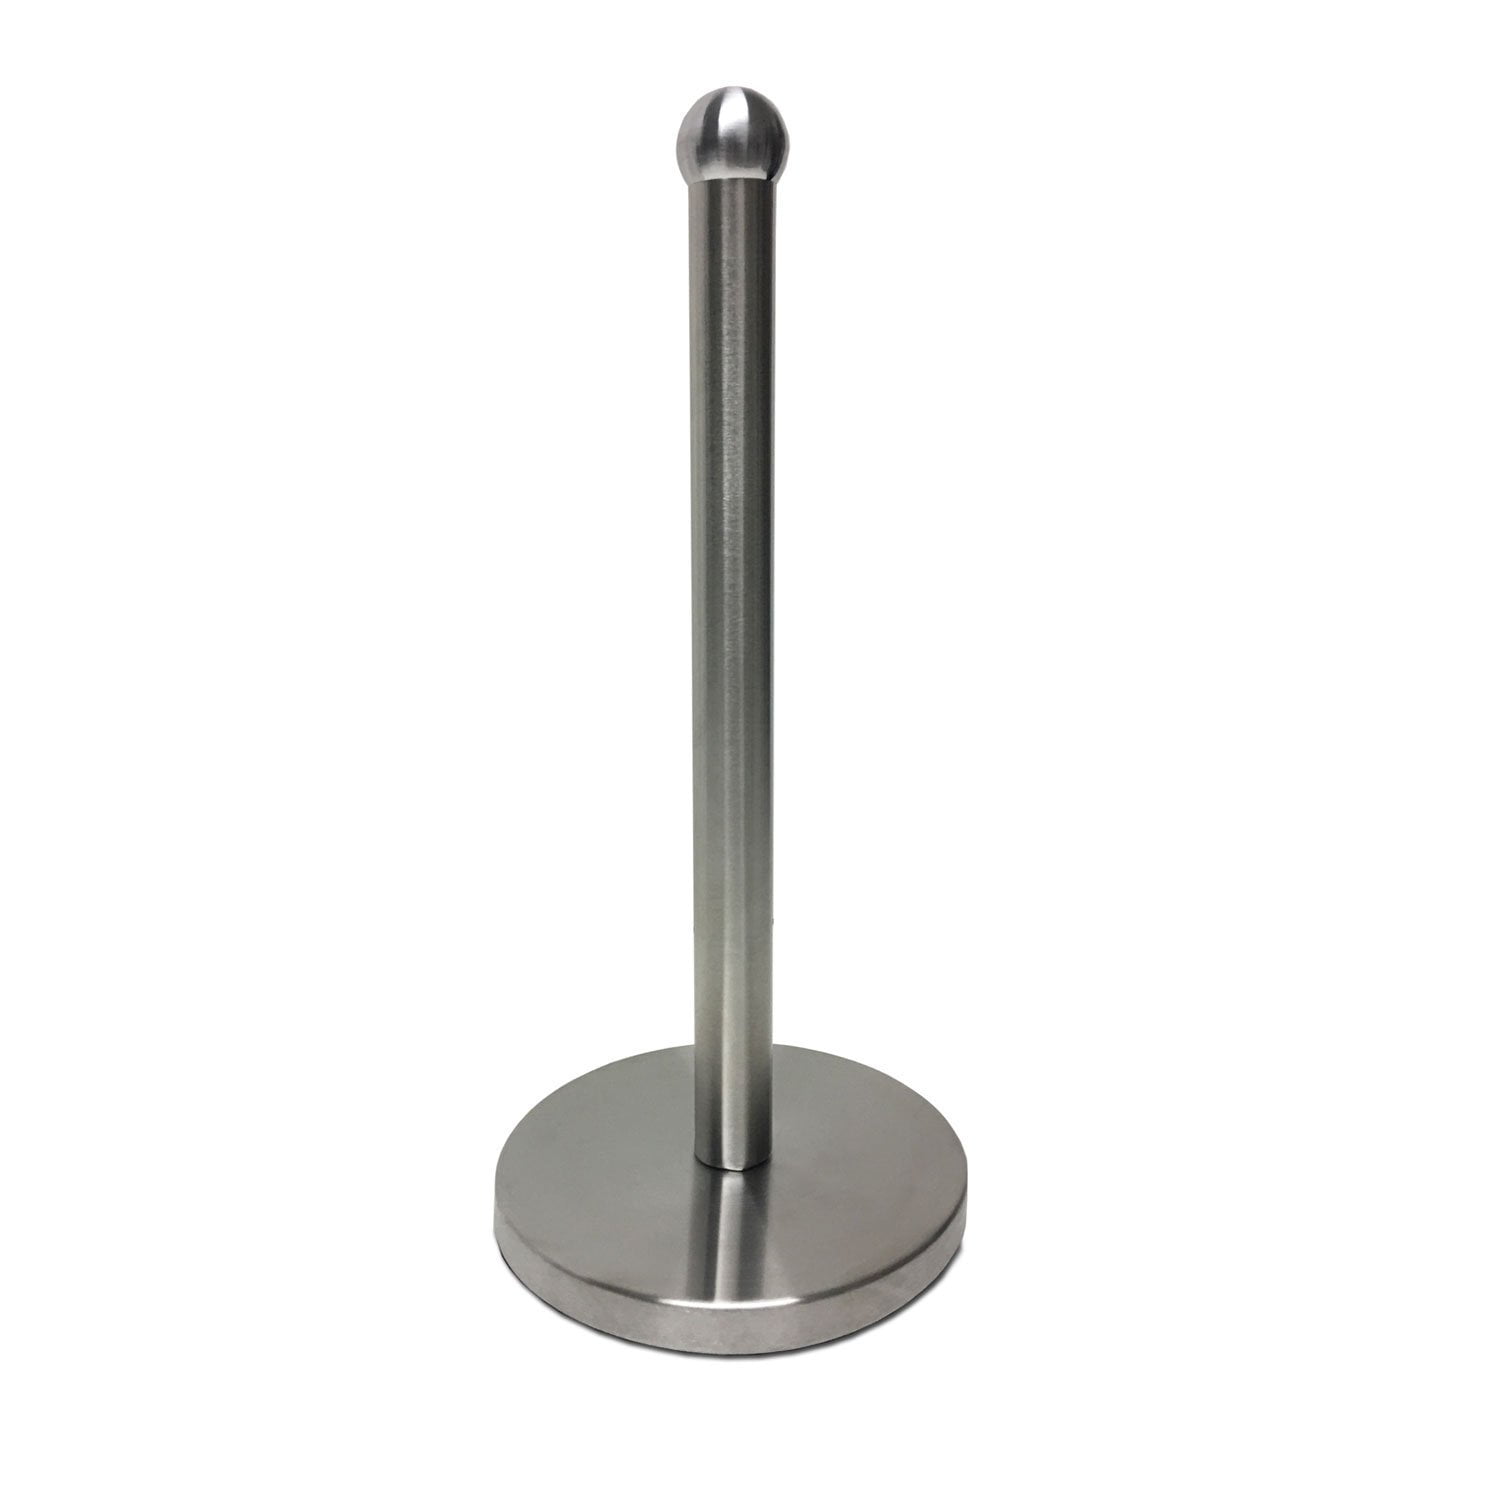 Luciano 12.5 inches Silver Metal Paper Towel Holder